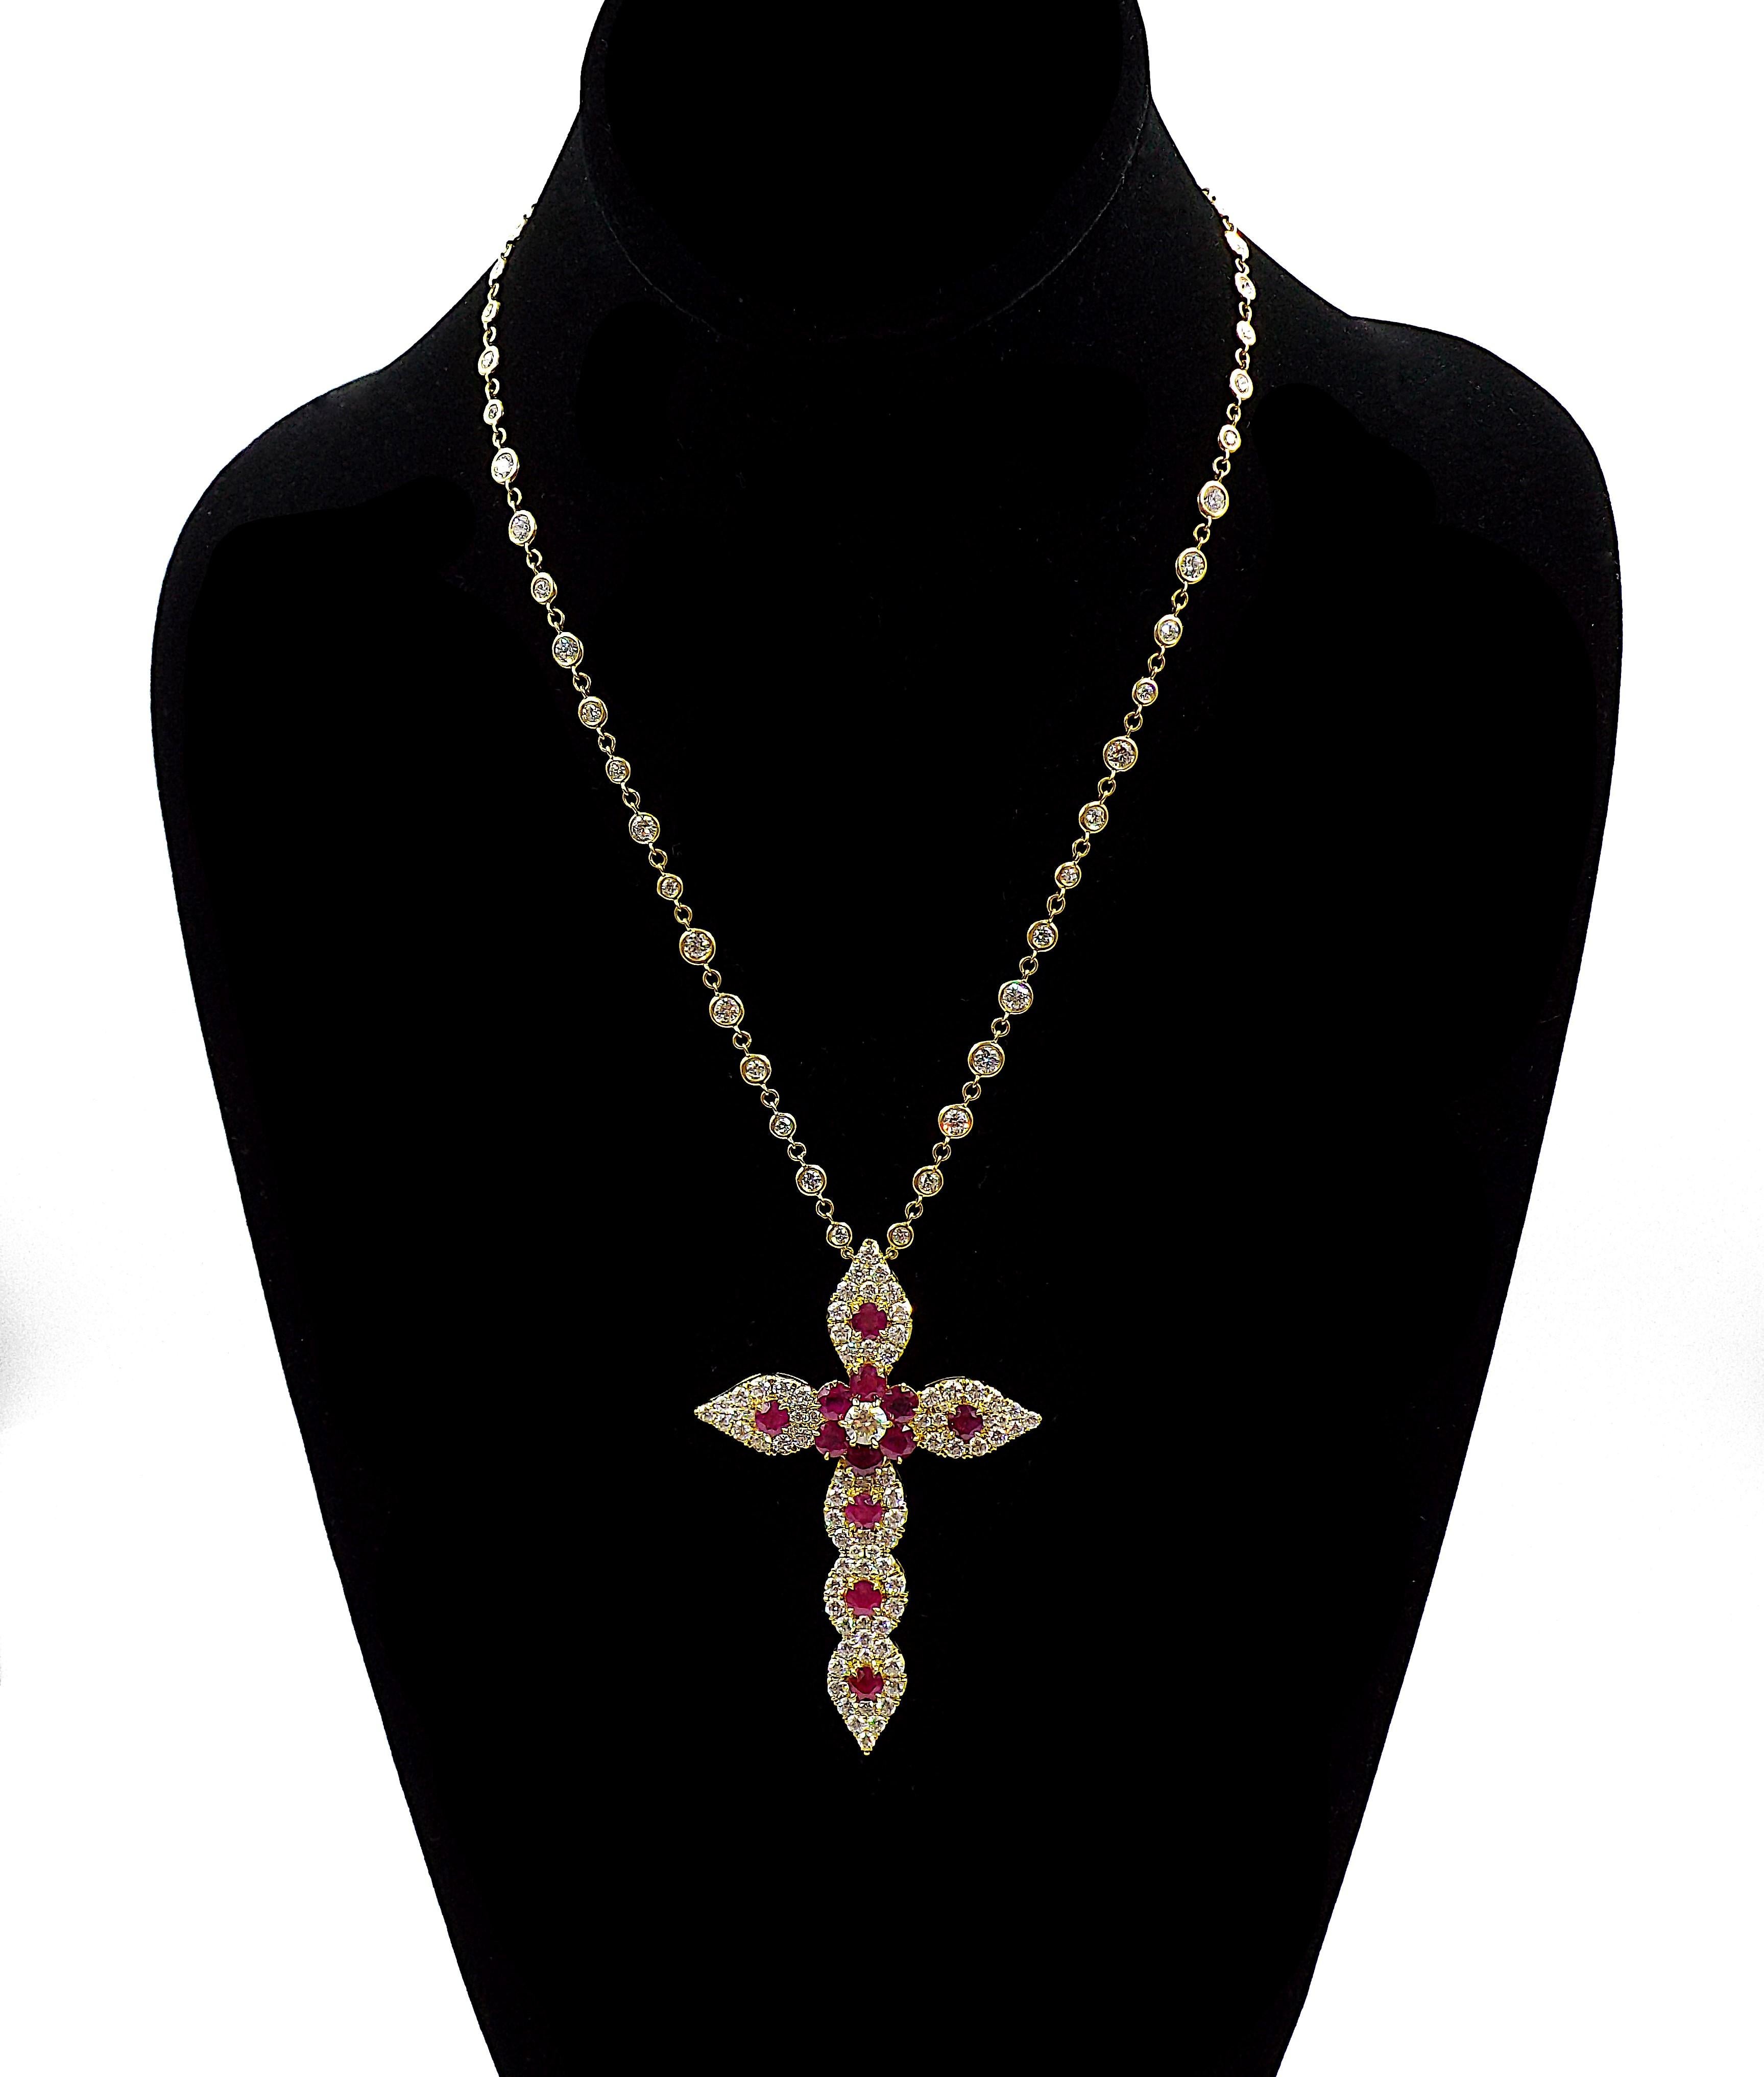 An elegant necklace with a cross pendant. Ap. 15ct of diamonds, ap. 6ct of Burma rubies, 18K yellow gold.